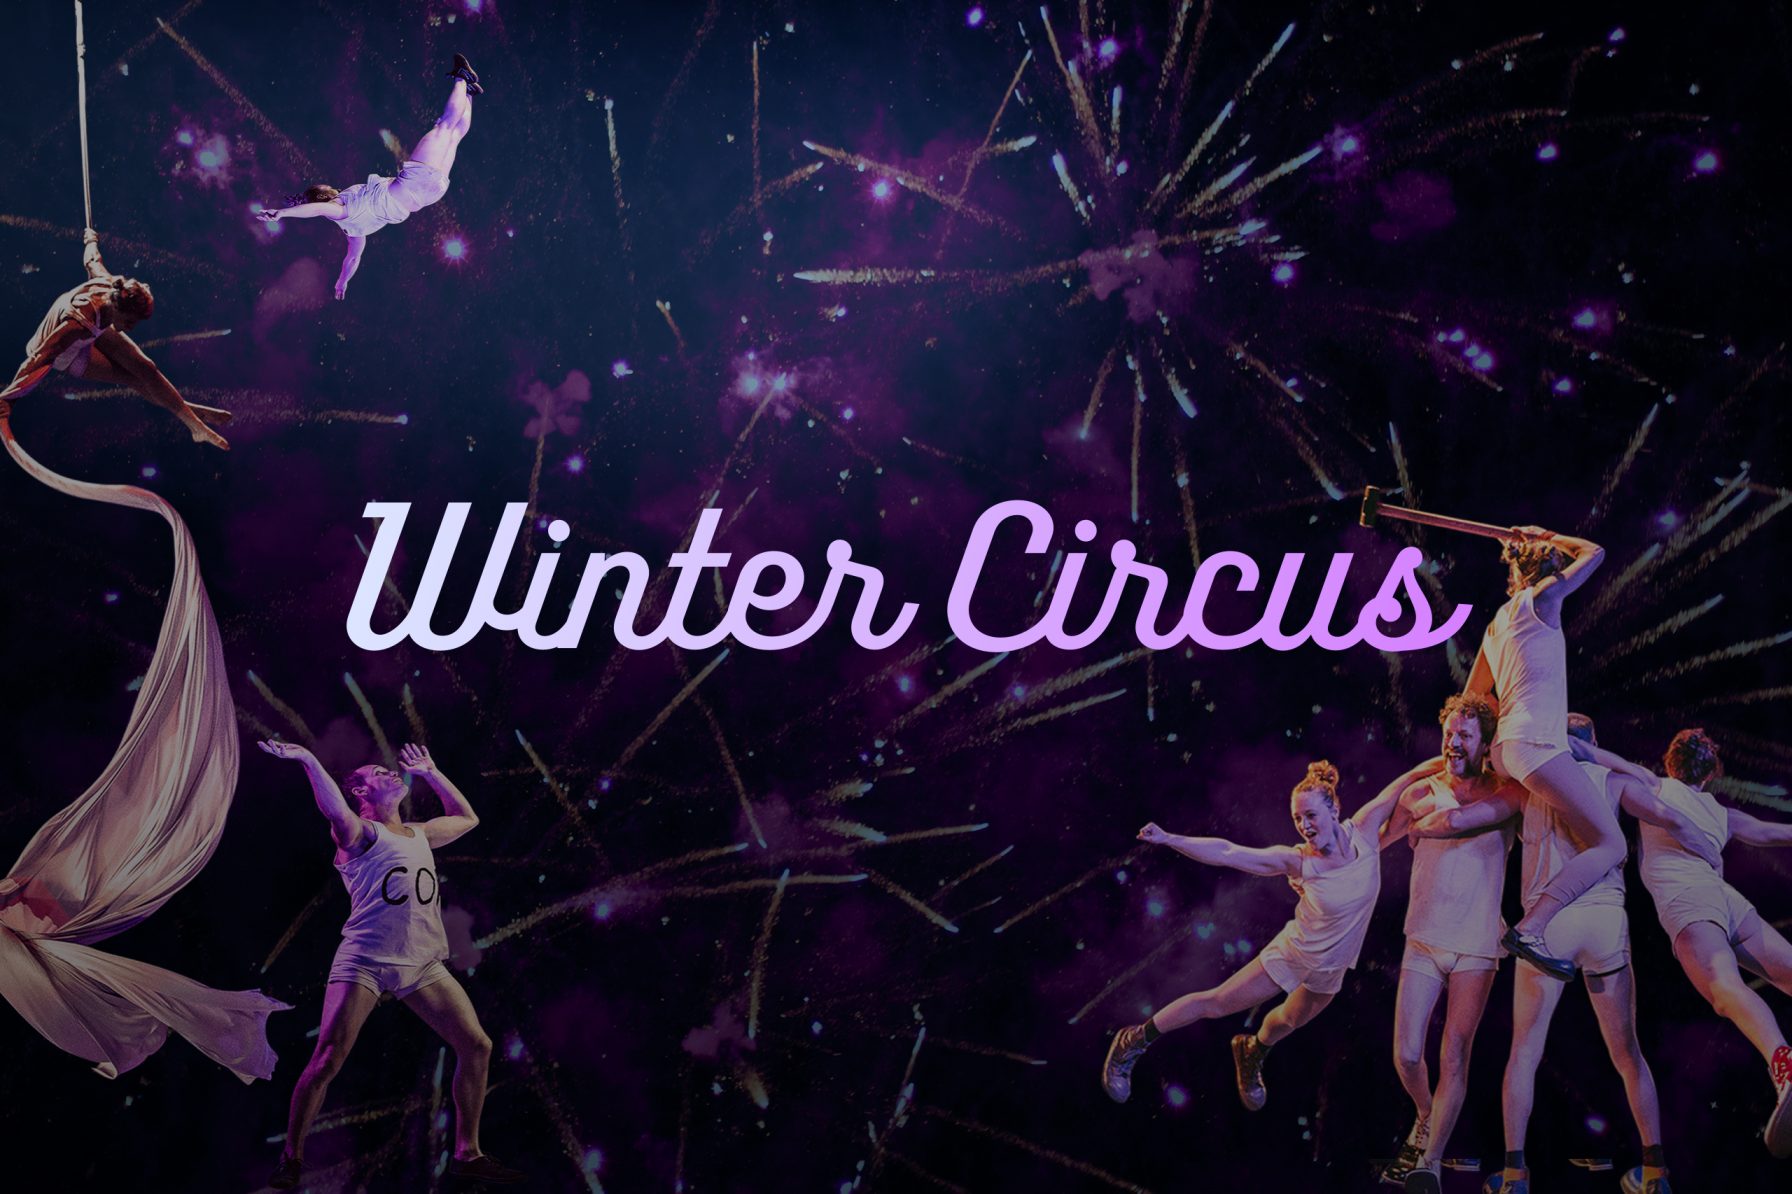 Winter Circus the show